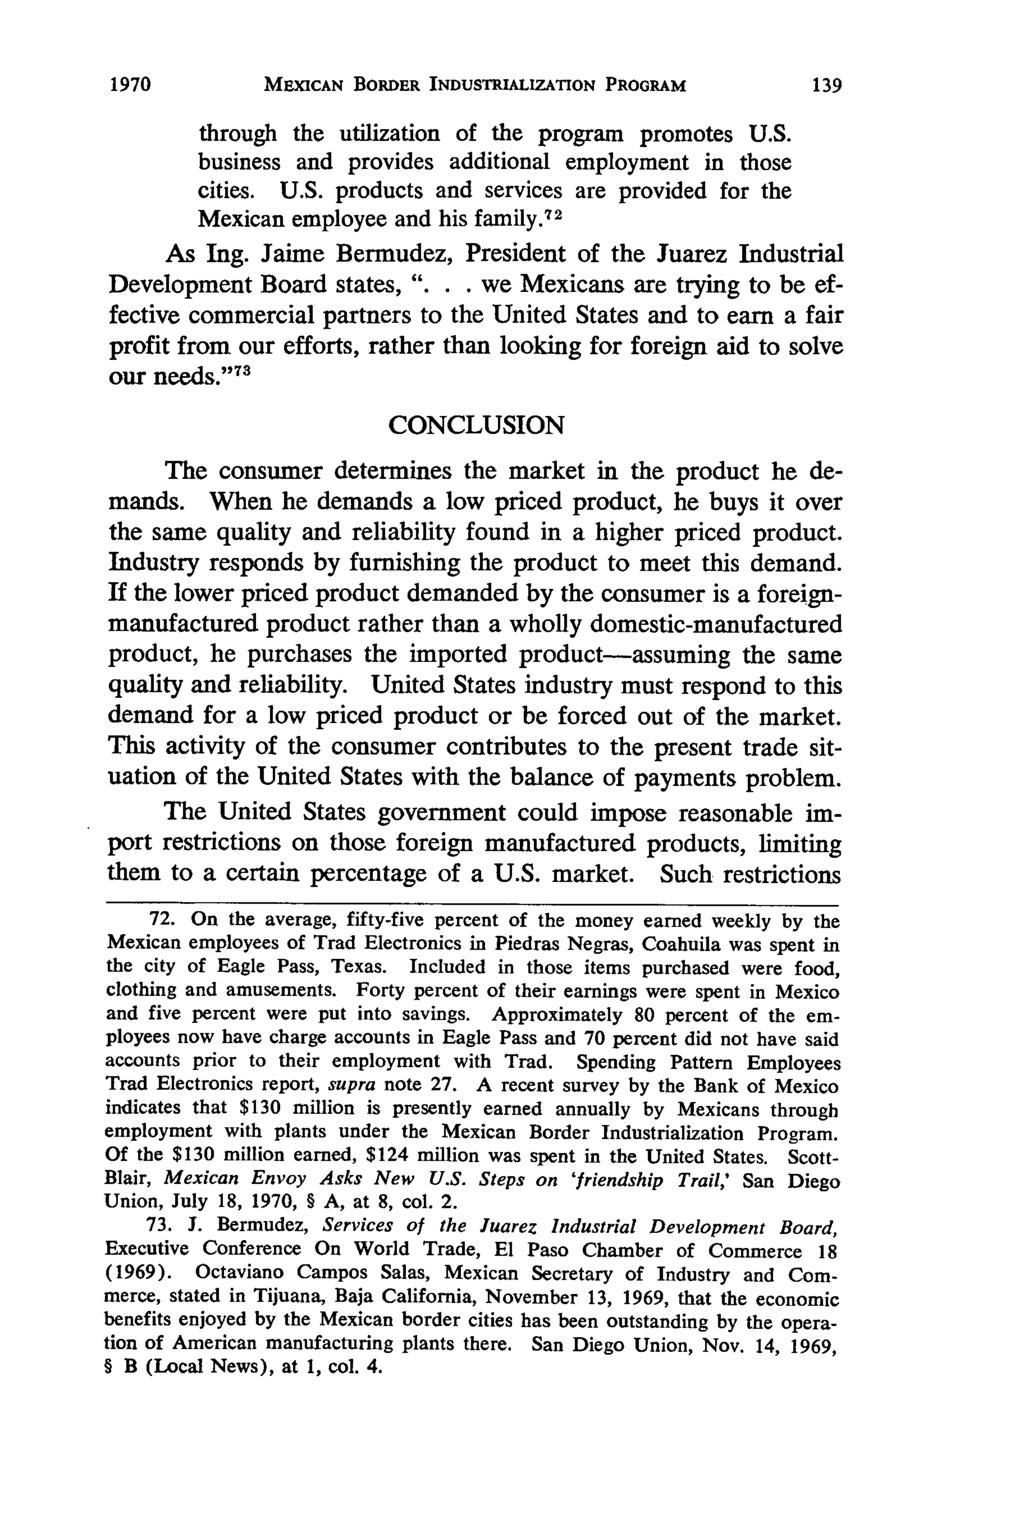 1970 California Western International Law Journal, Vol. 1 [1970], No. 1, Art. 9 MEXICAN BORDER INDUSTRIALIZATION PROGRAM through the utilization of the program promotes U.S. business and provides additional employment in those cities.